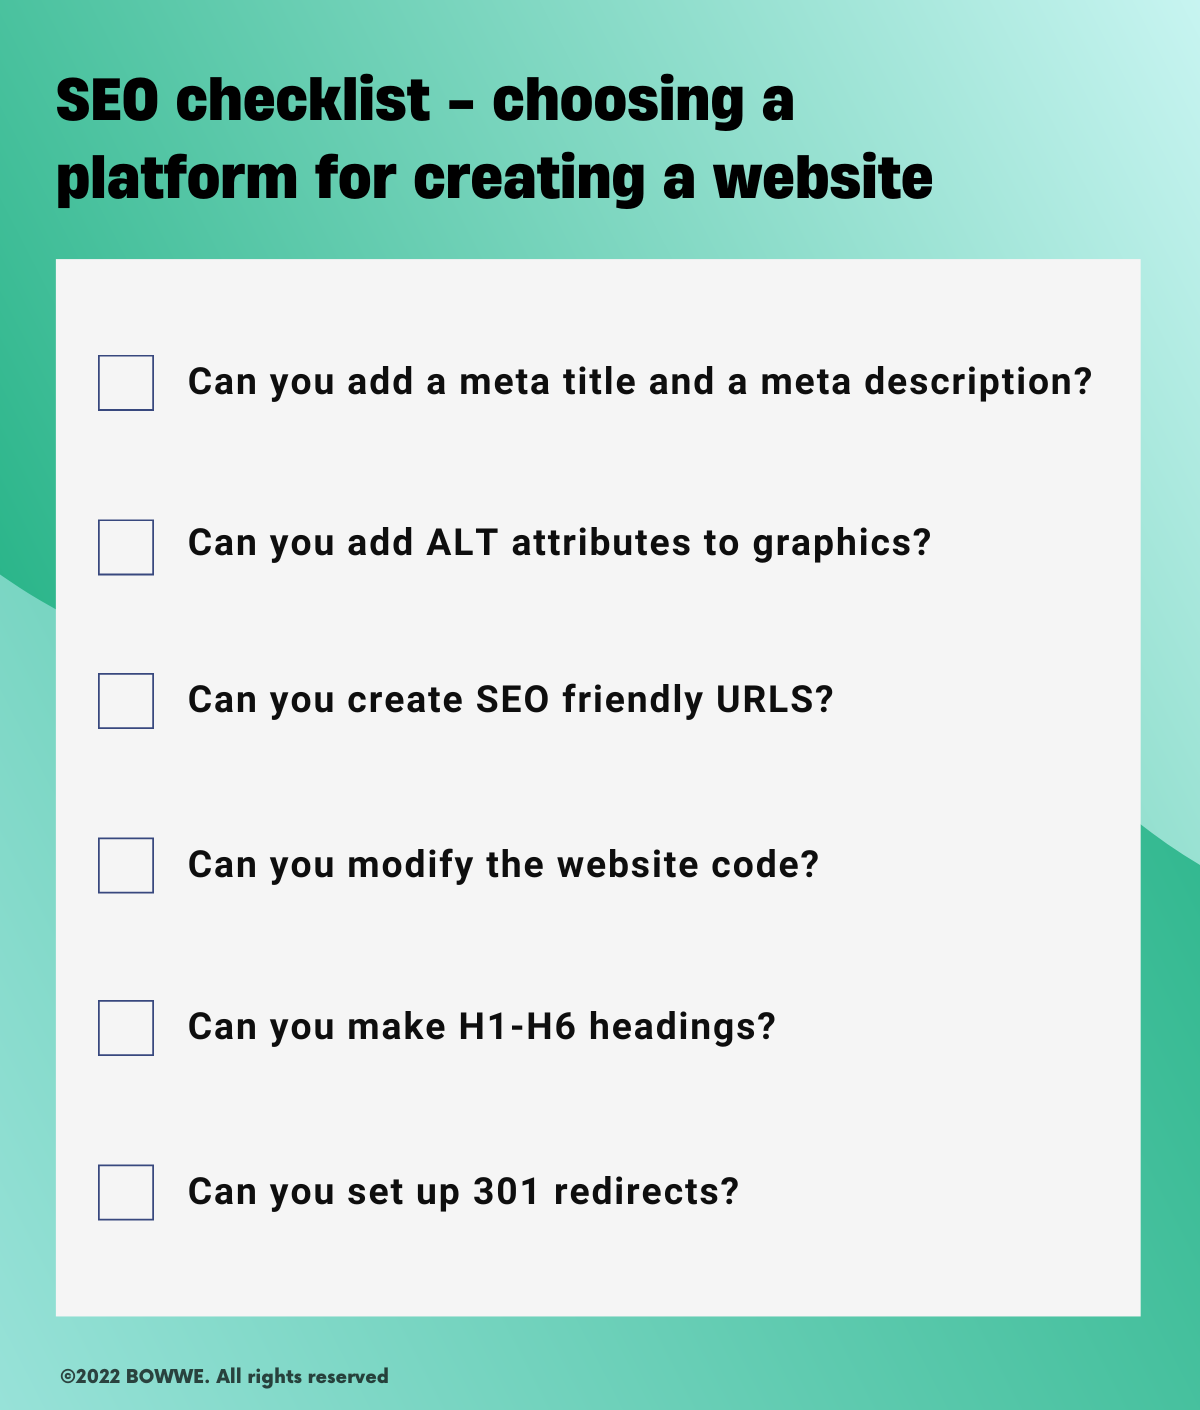 SEO Checklist of what to paid attention to when choosing platfor for website creation